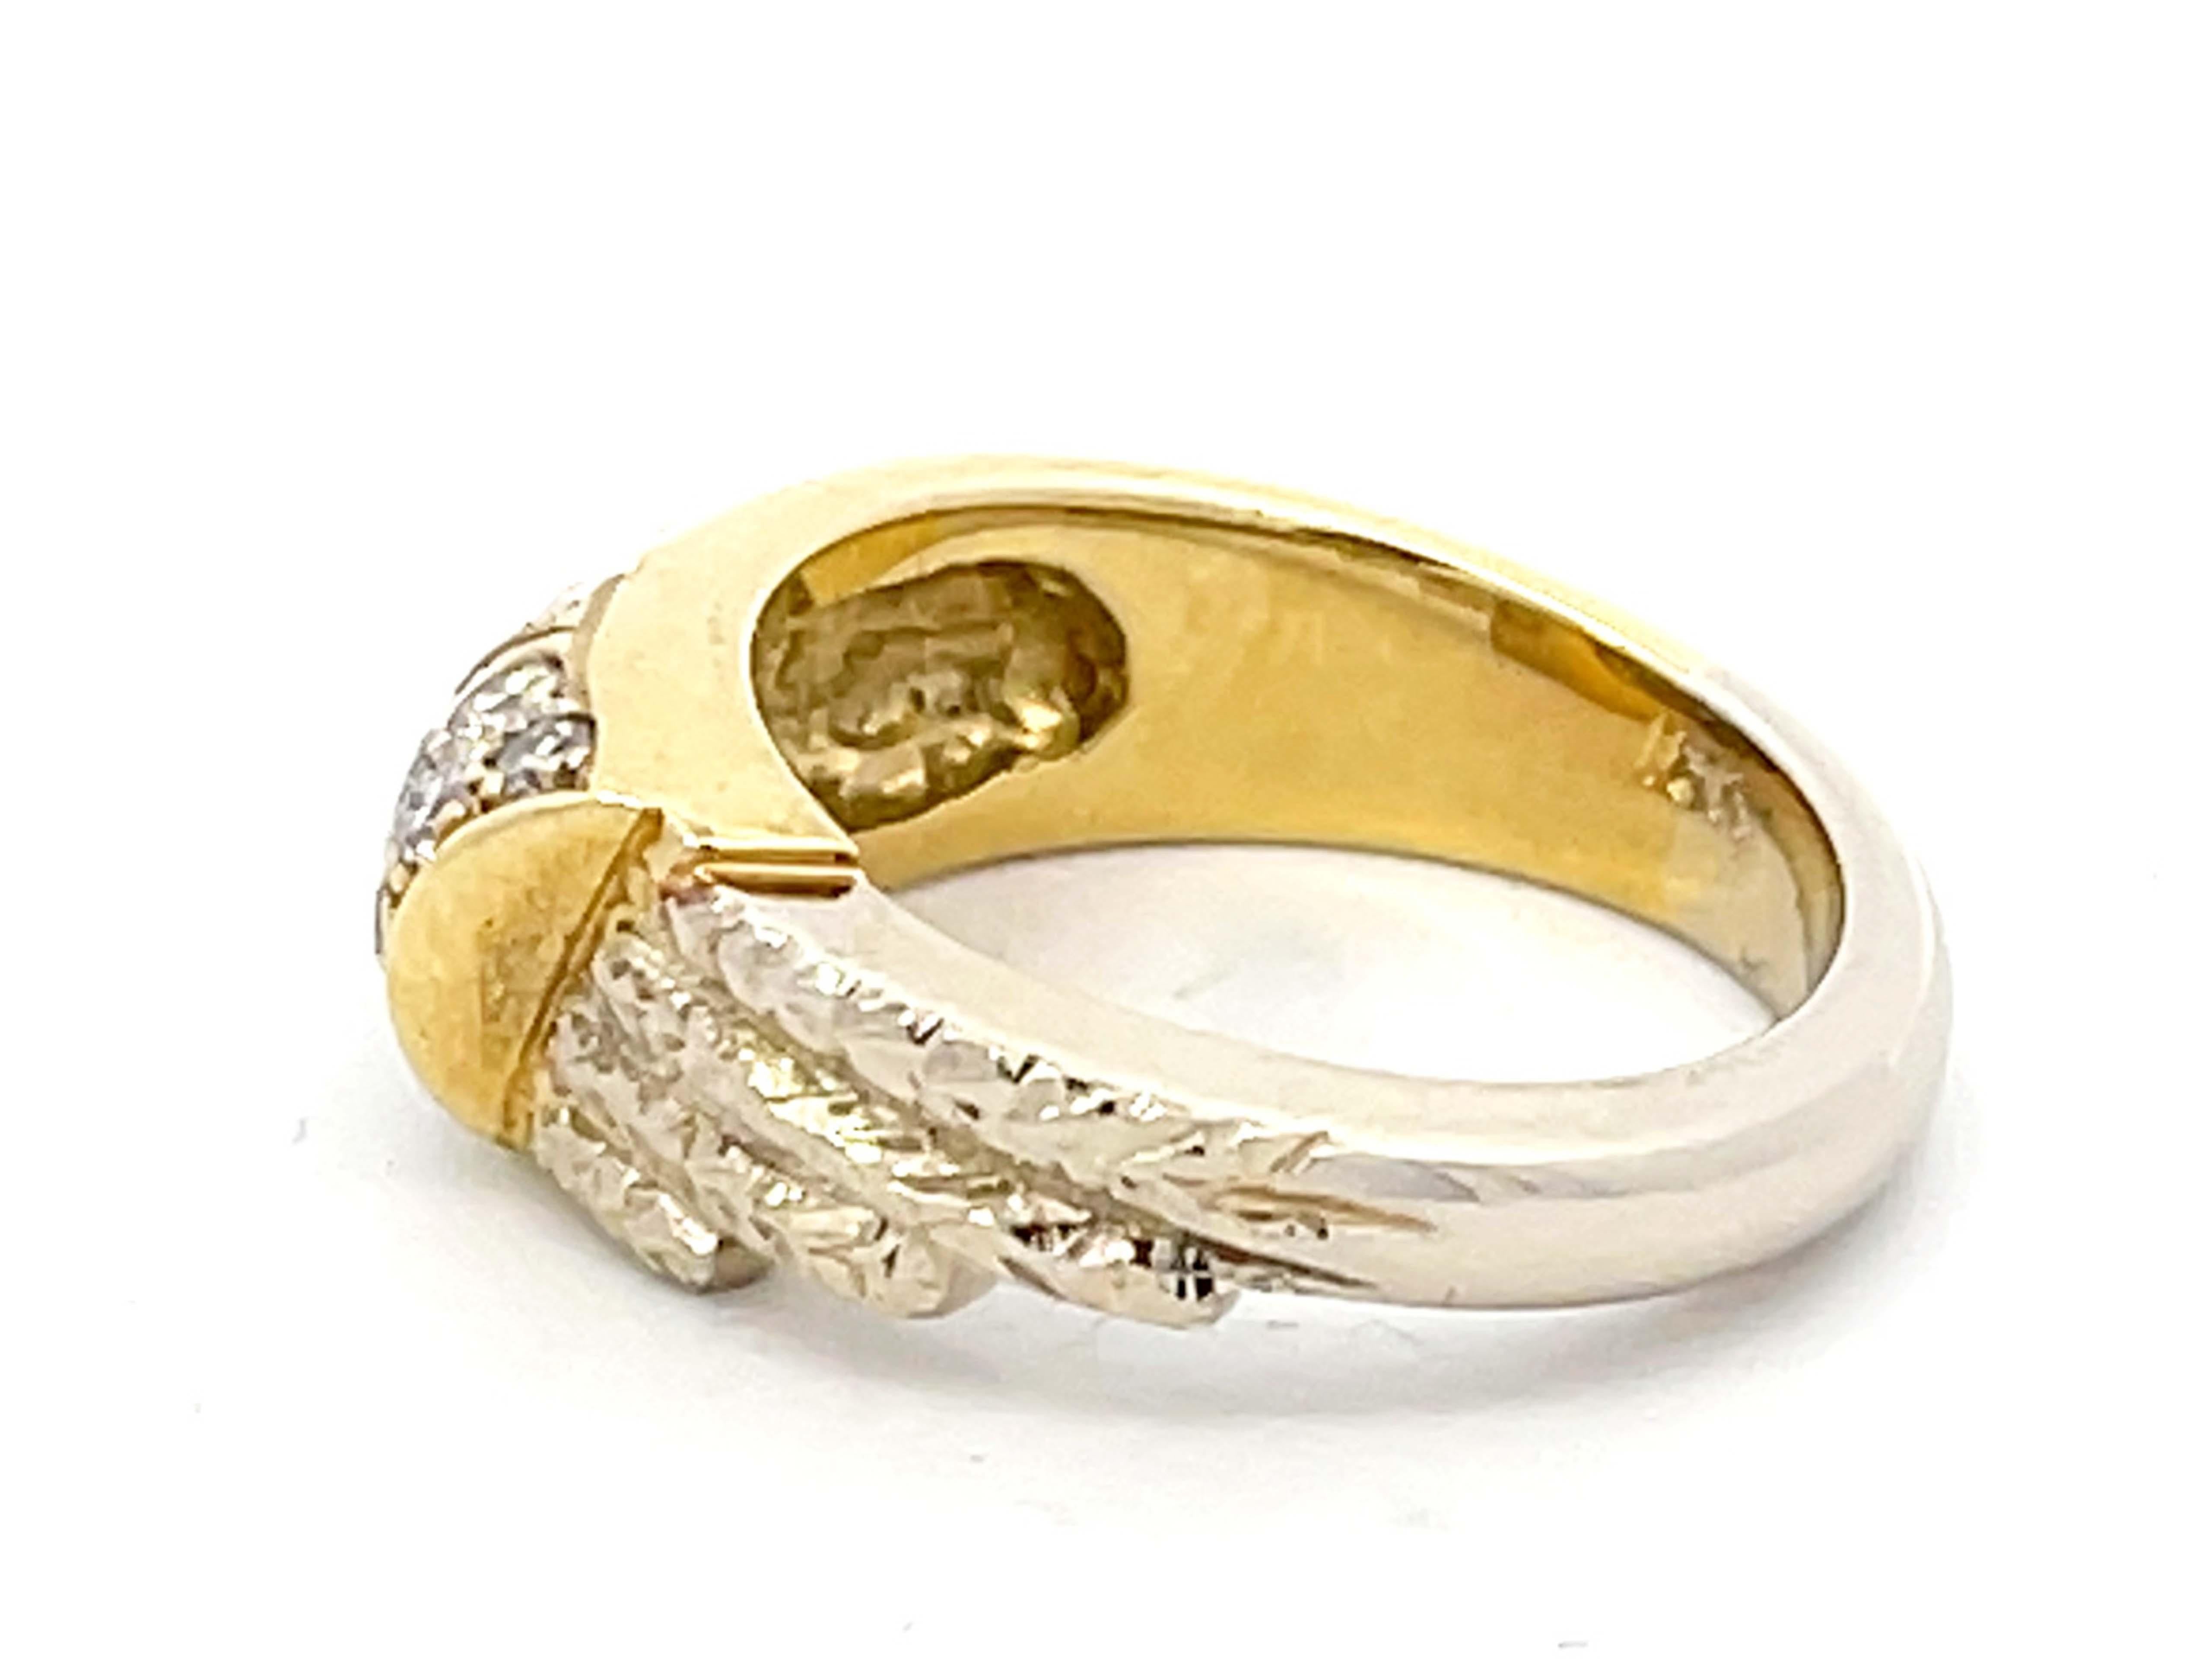 Plumeria Diamond Two Toned Textured Ring in 18k Gold In Excellent Condition For Sale In Honolulu, HI